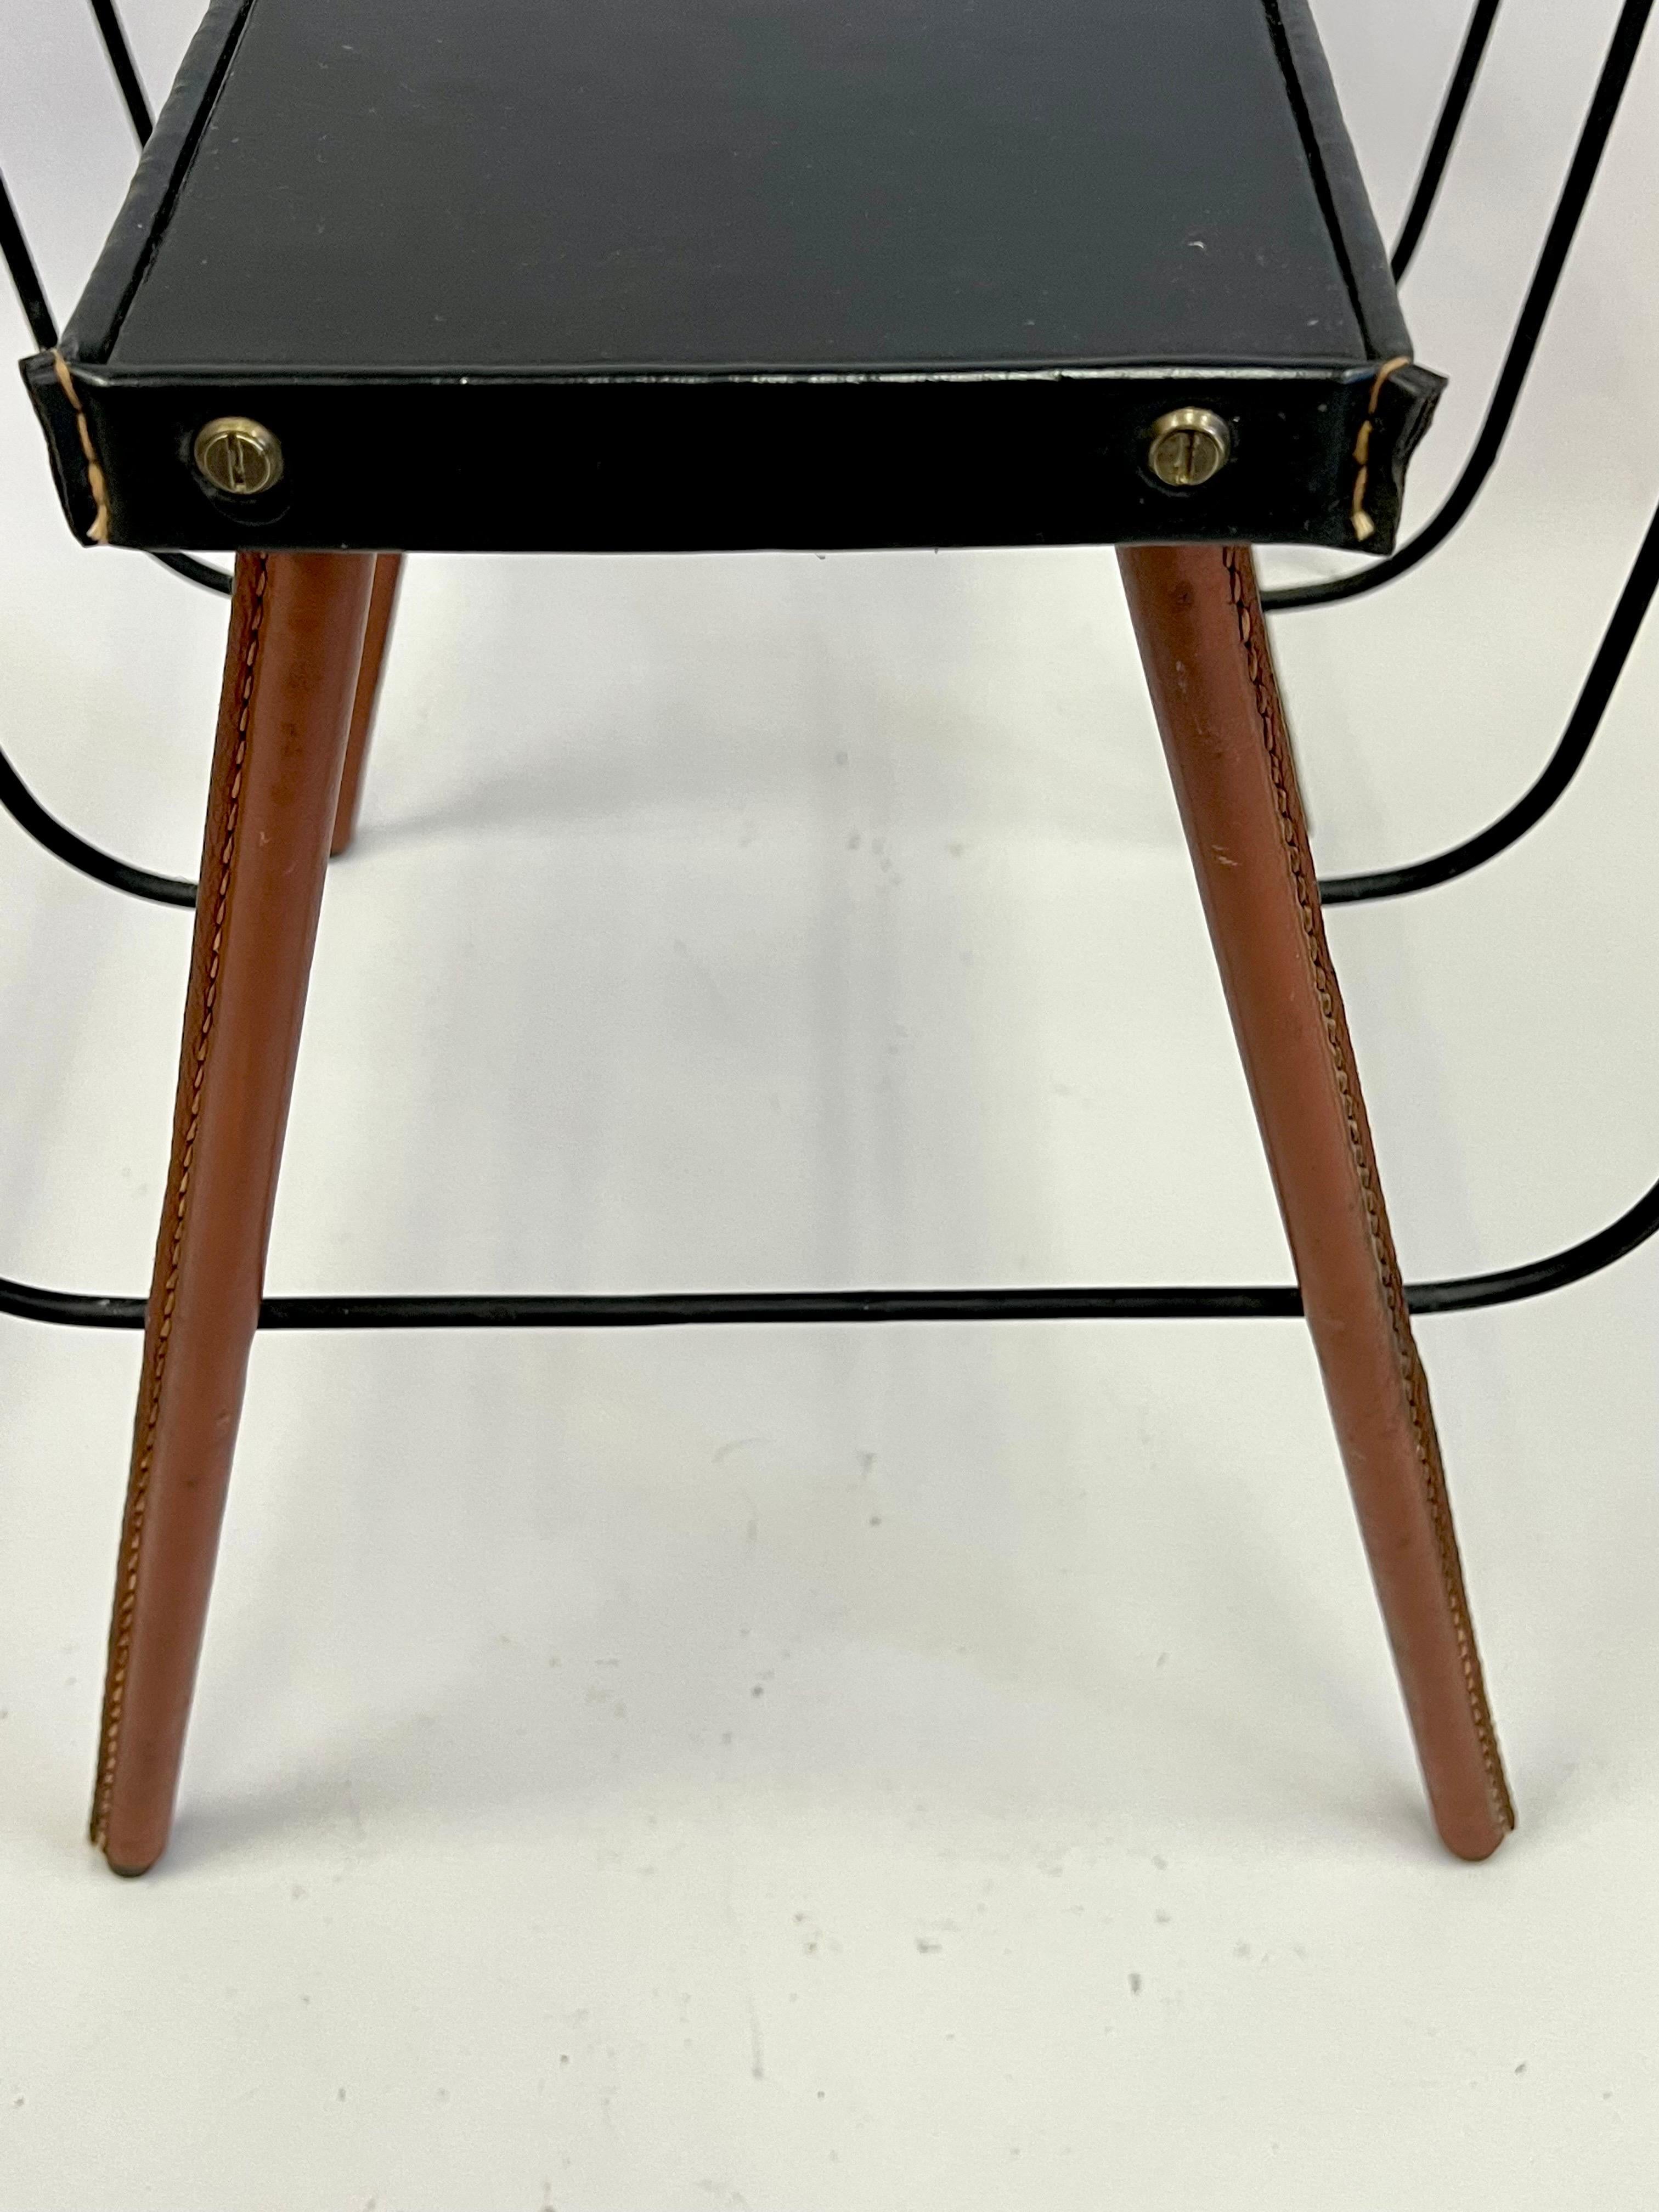 French Midcentury Handstitched Leather Bench / Magazine Stand by Jacques Adnet For Sale 4